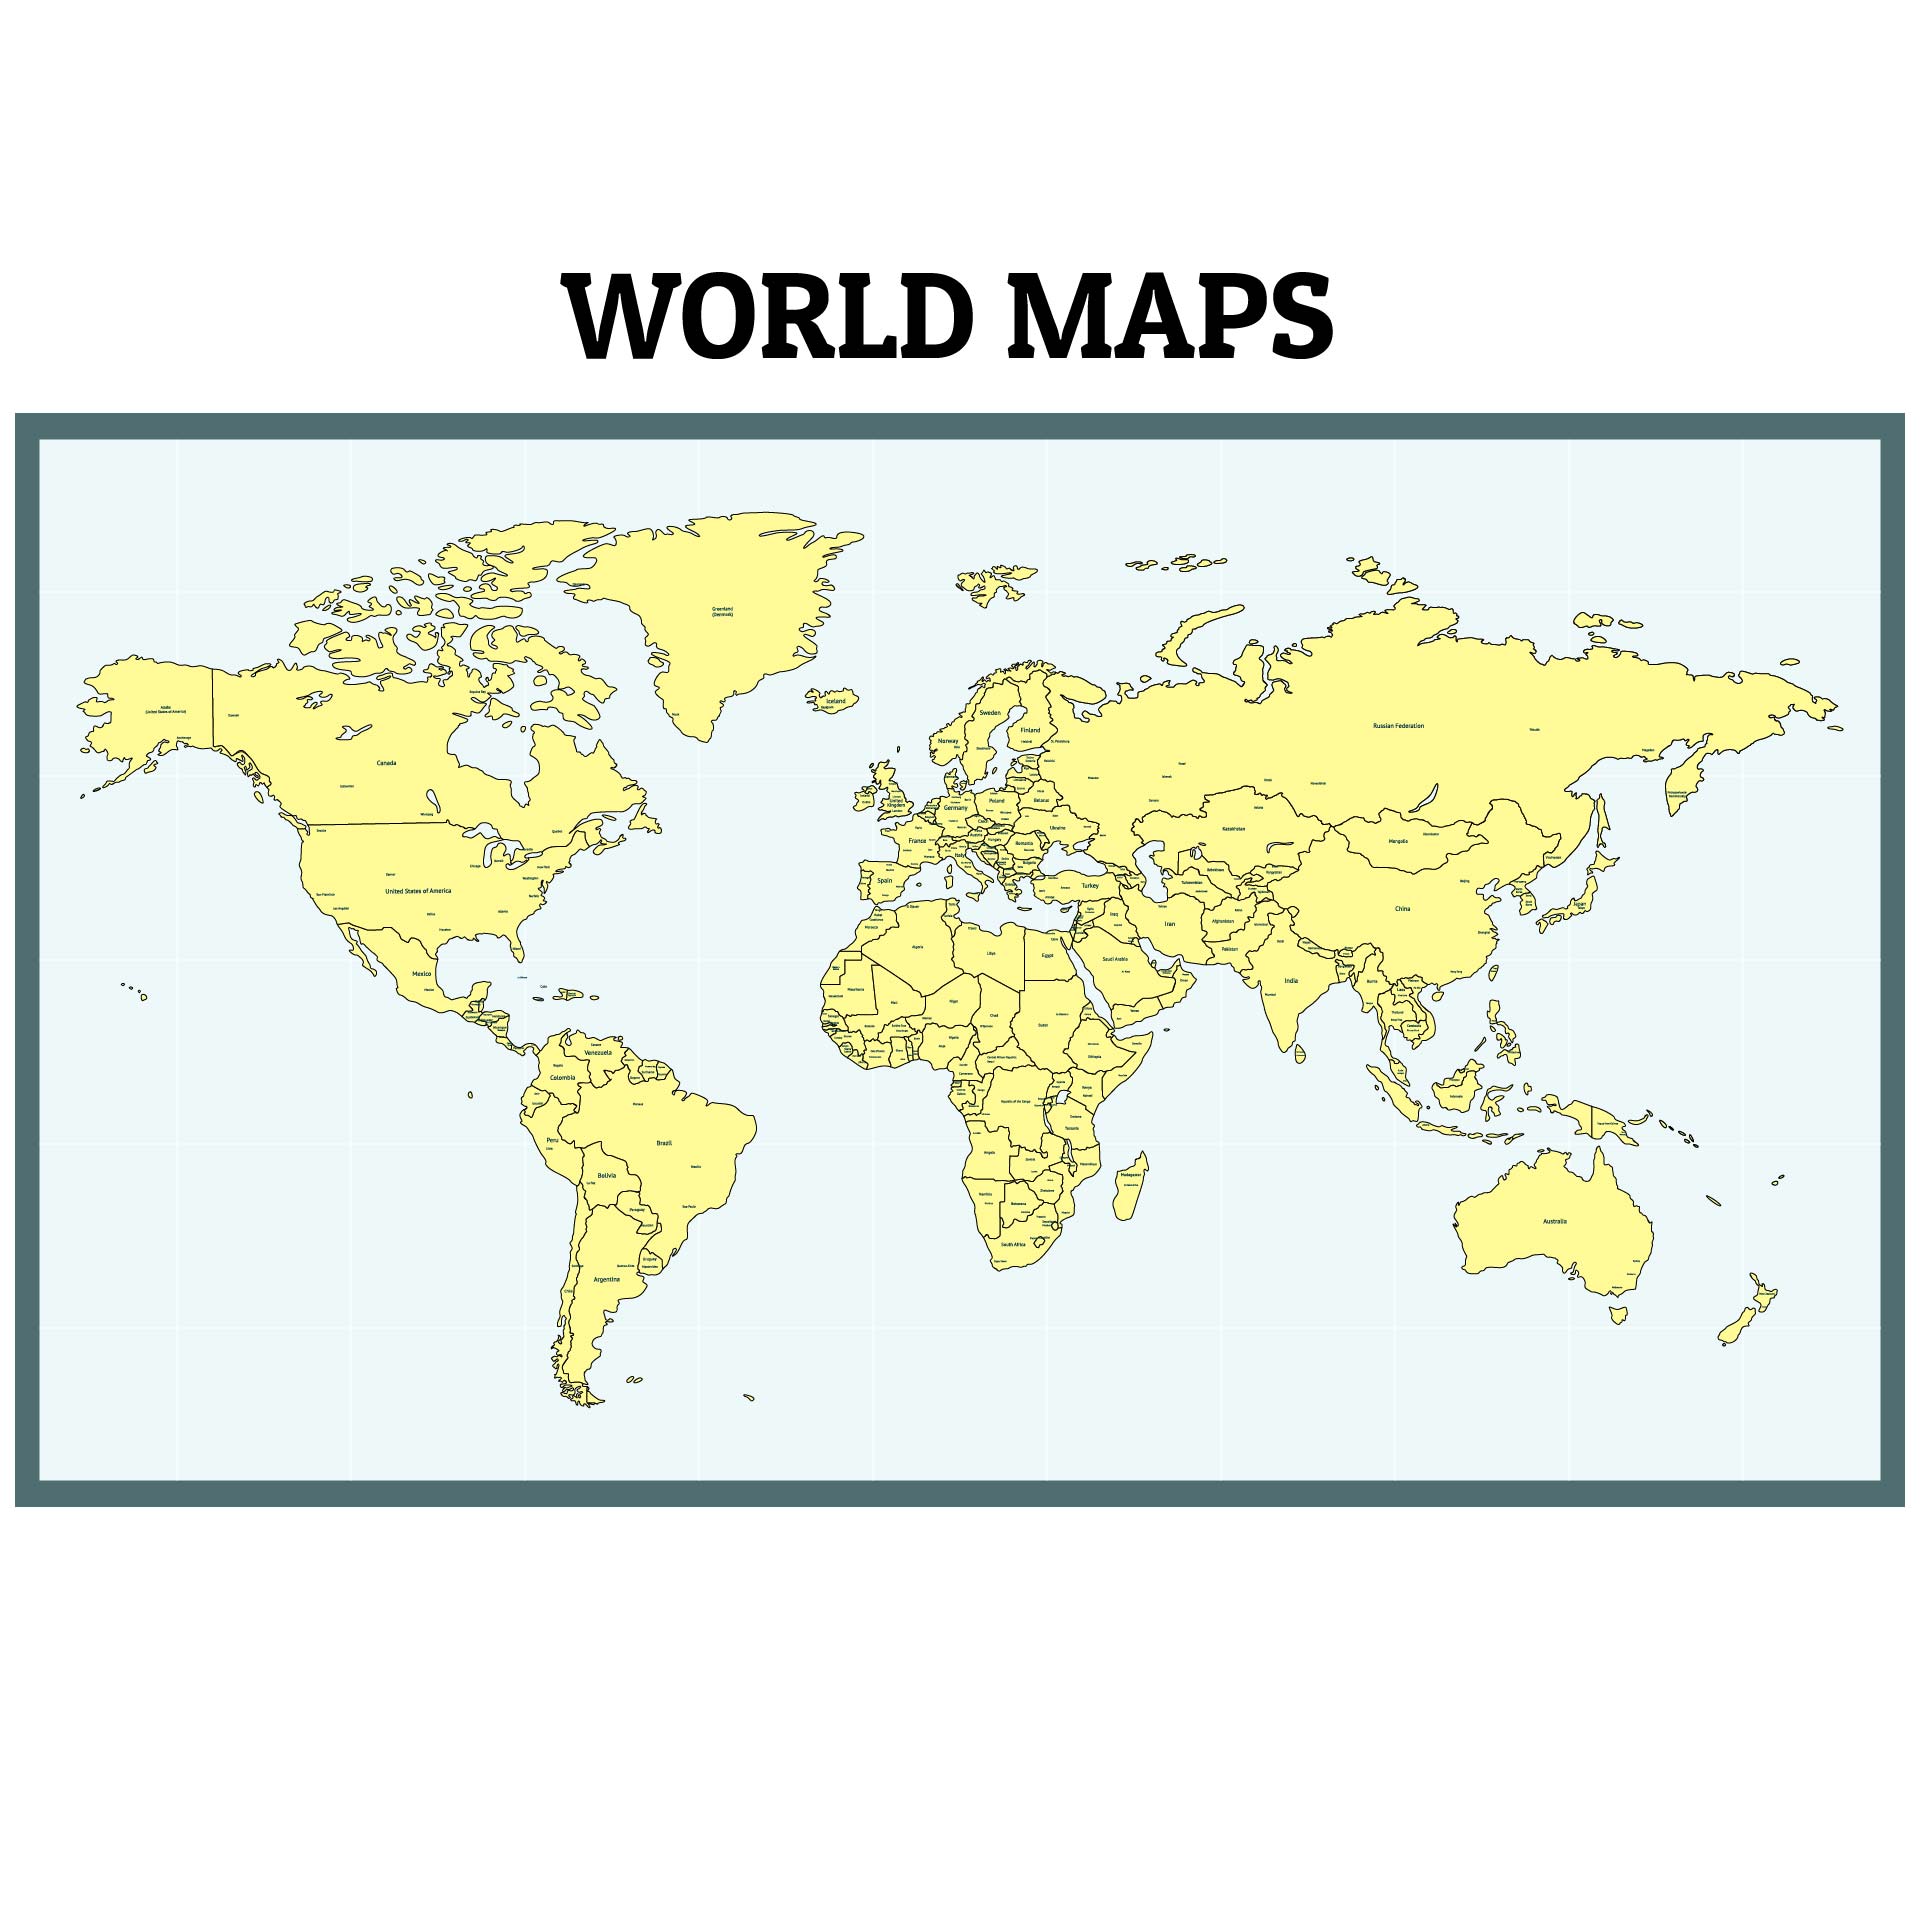 Printable World Map Showing Countries